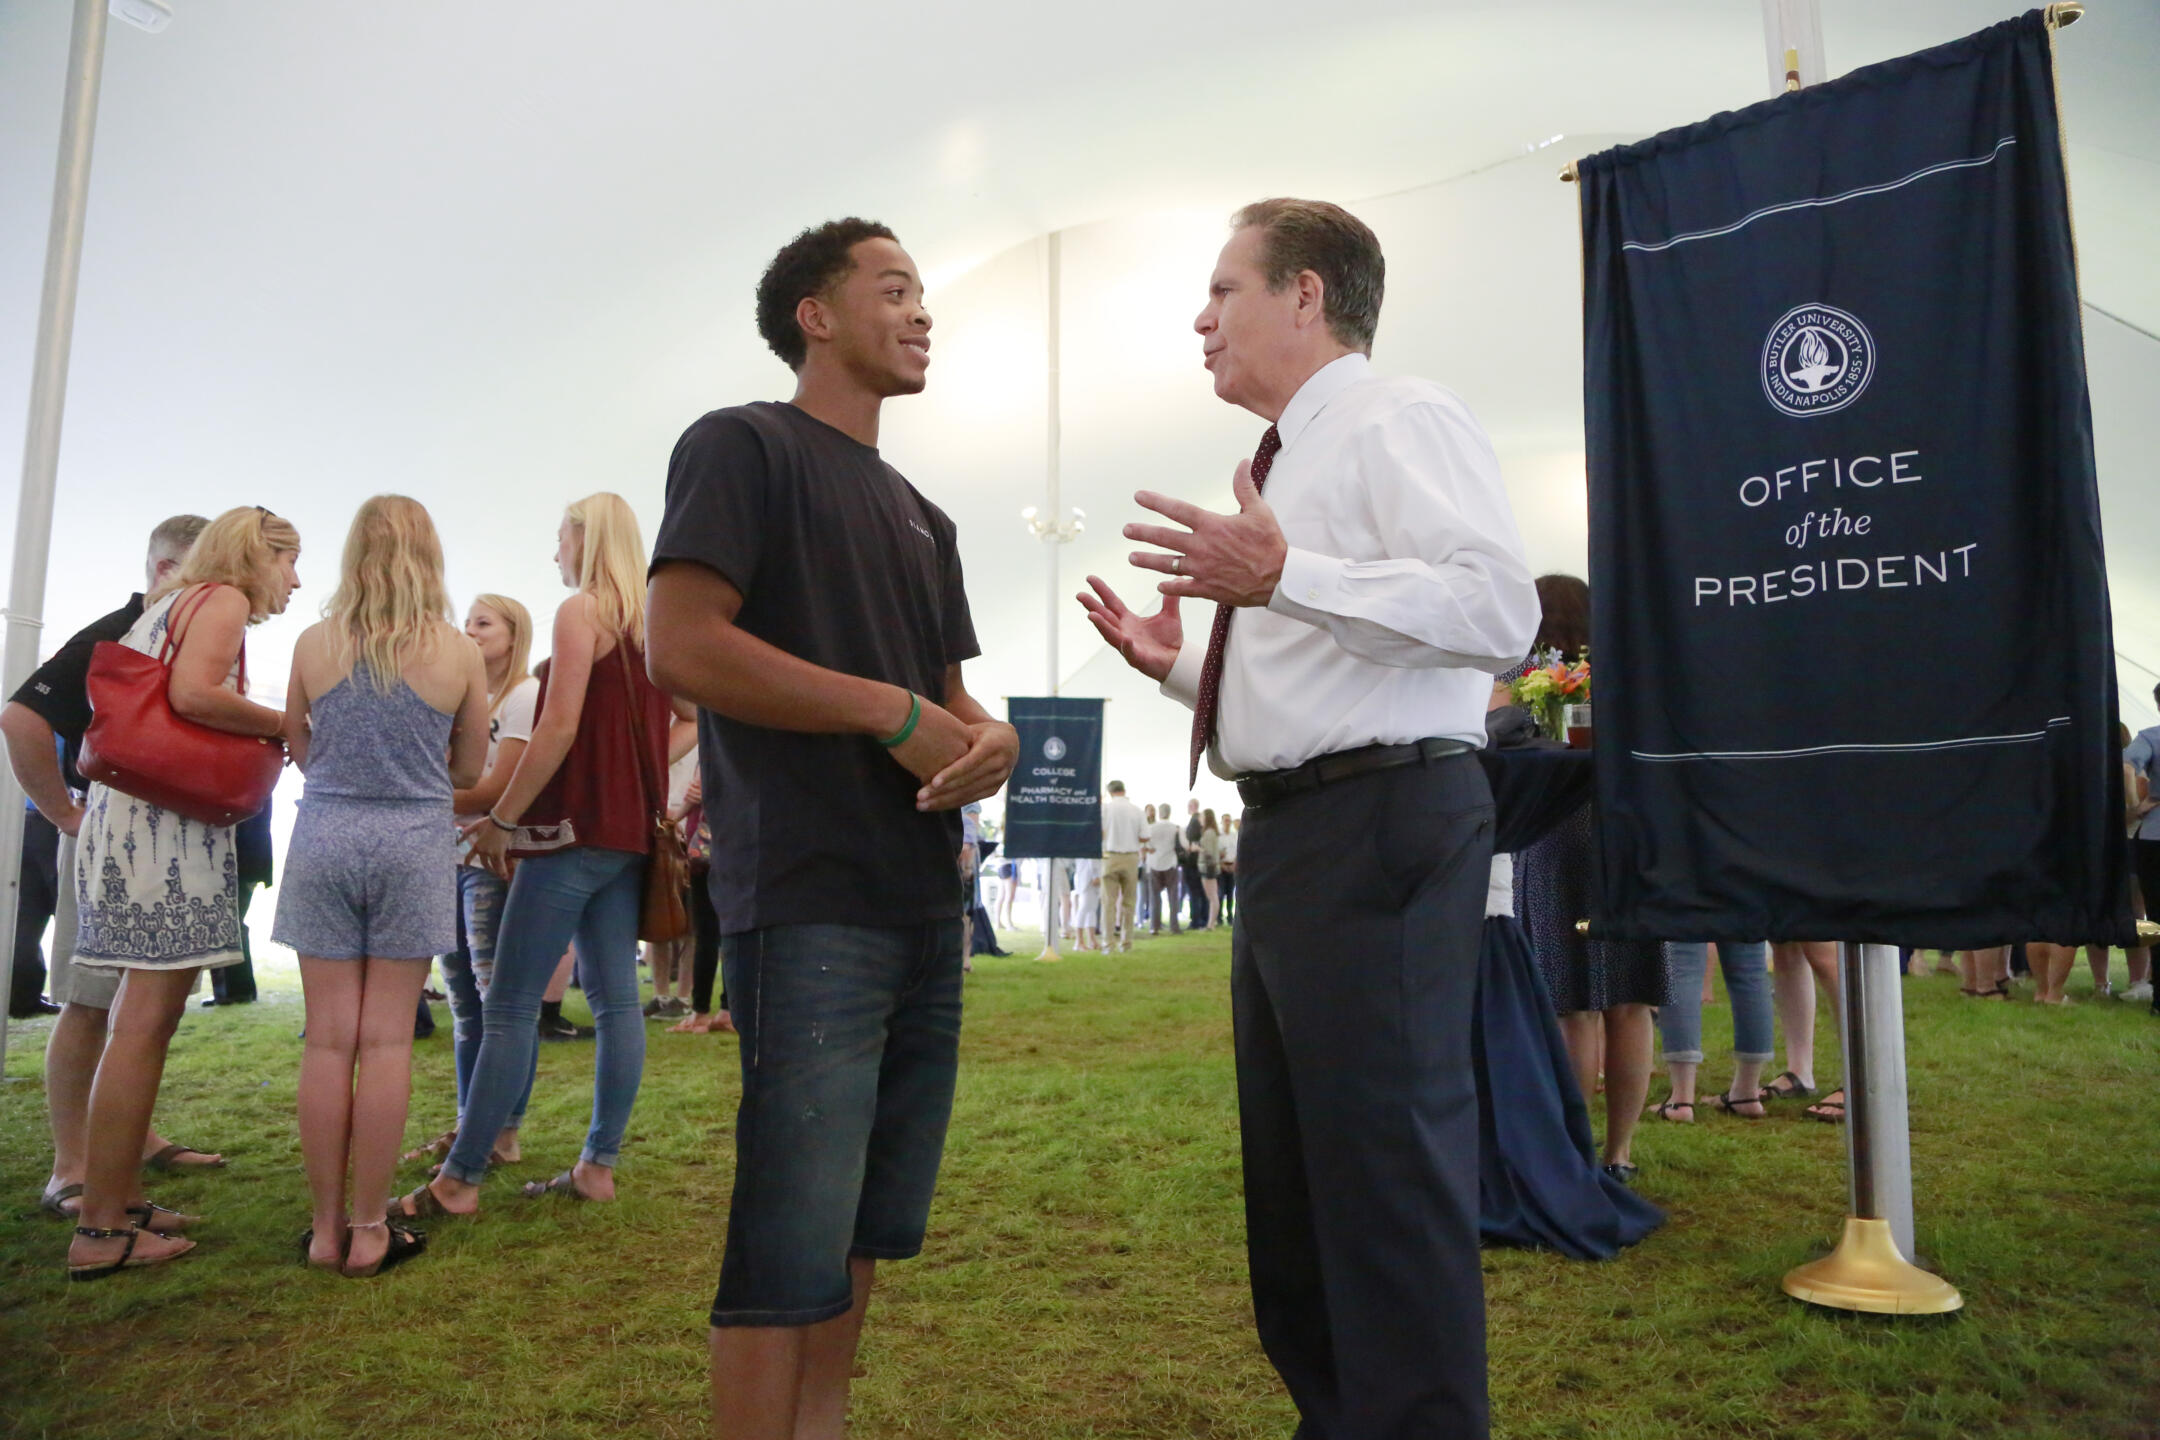 president danko in white shirt, red tie, dark pants talking to male student in denim shorts and black t-shirt. signage reads Office of the President